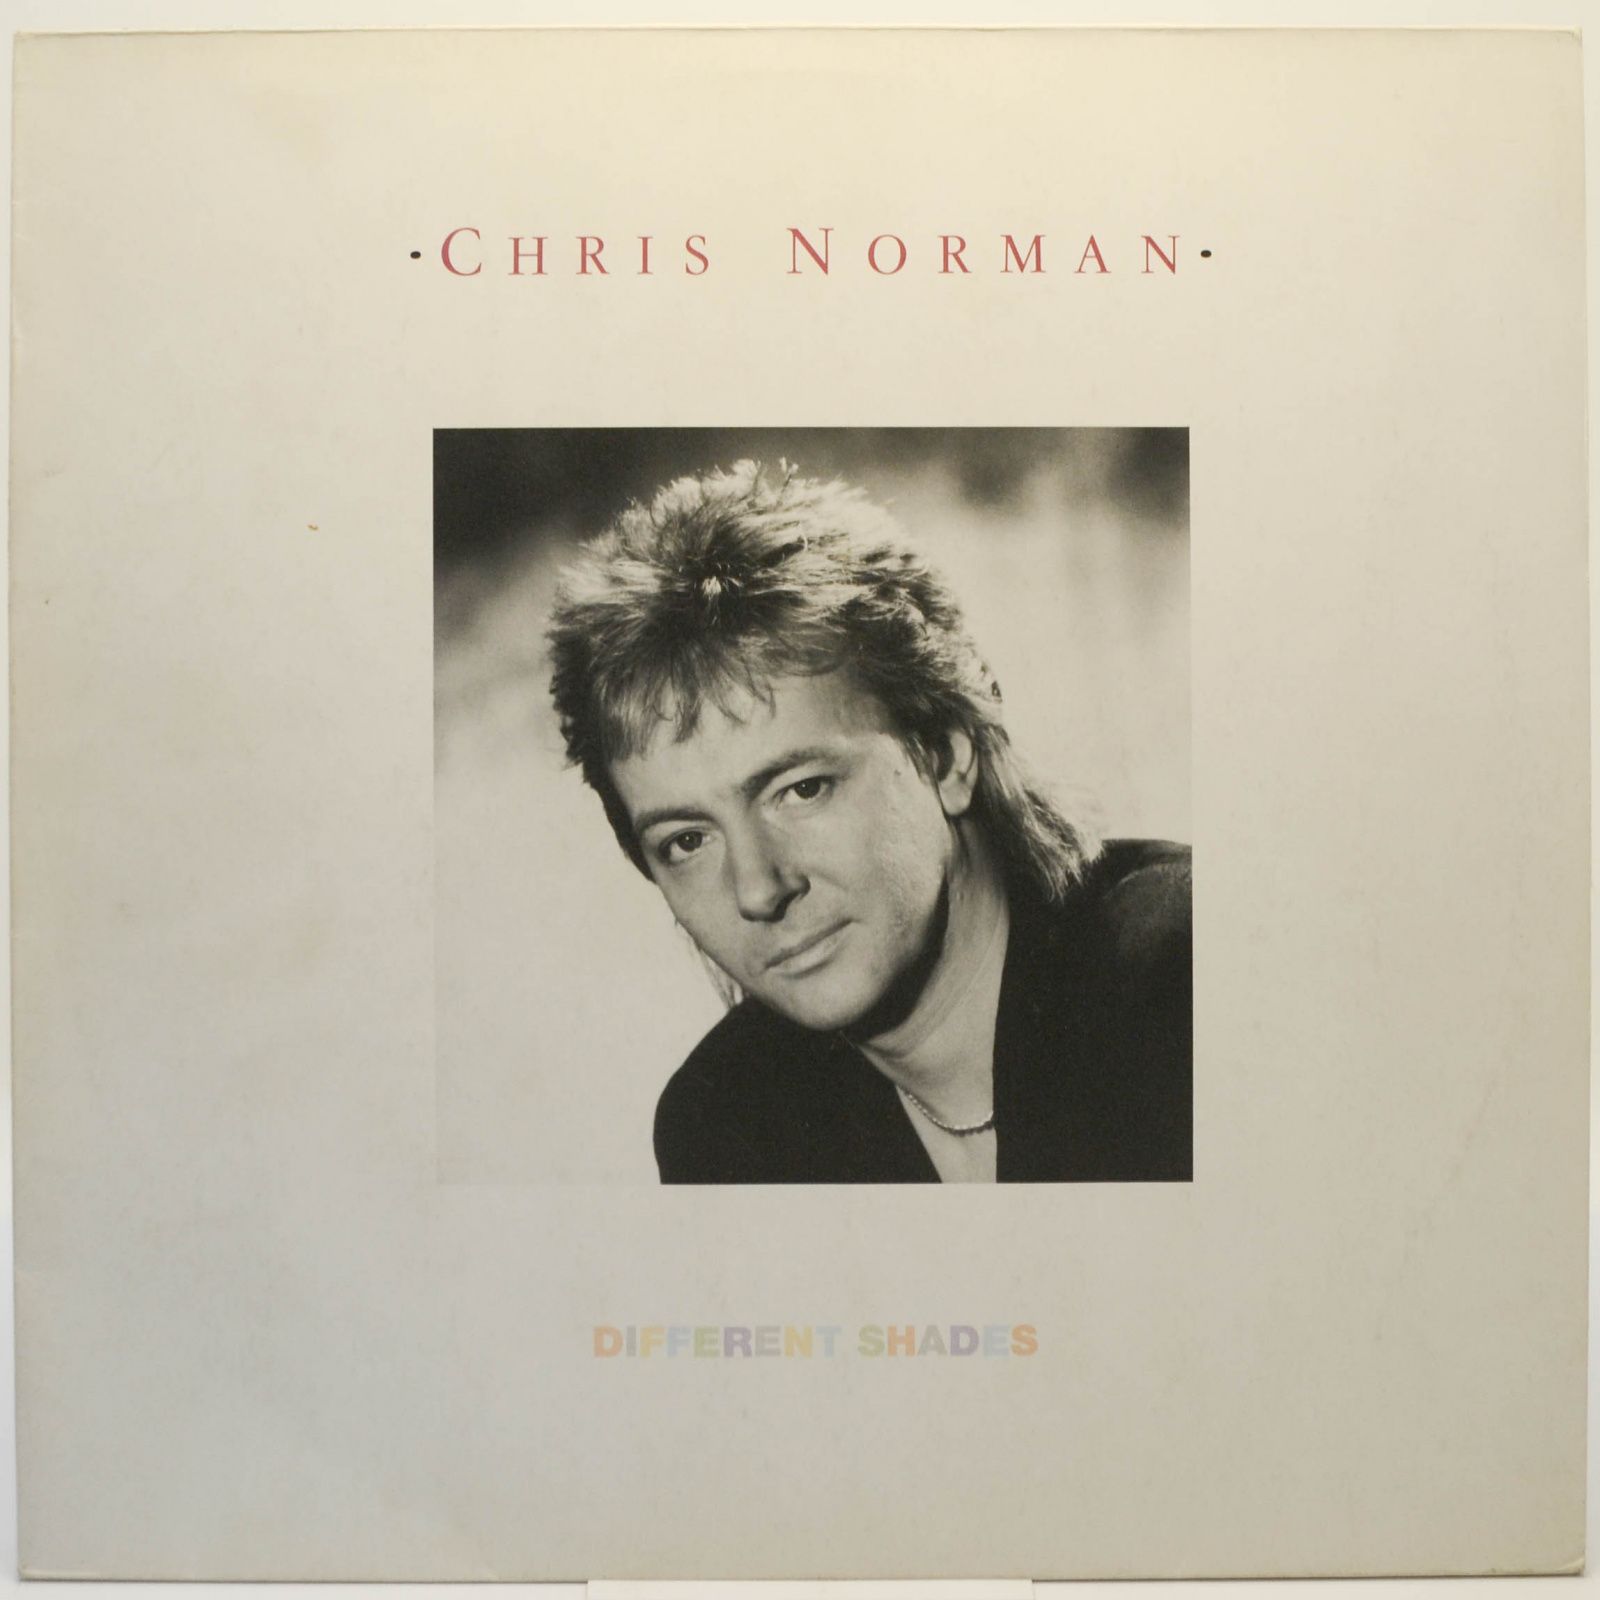 Chris Norman — Different Shades, 1987